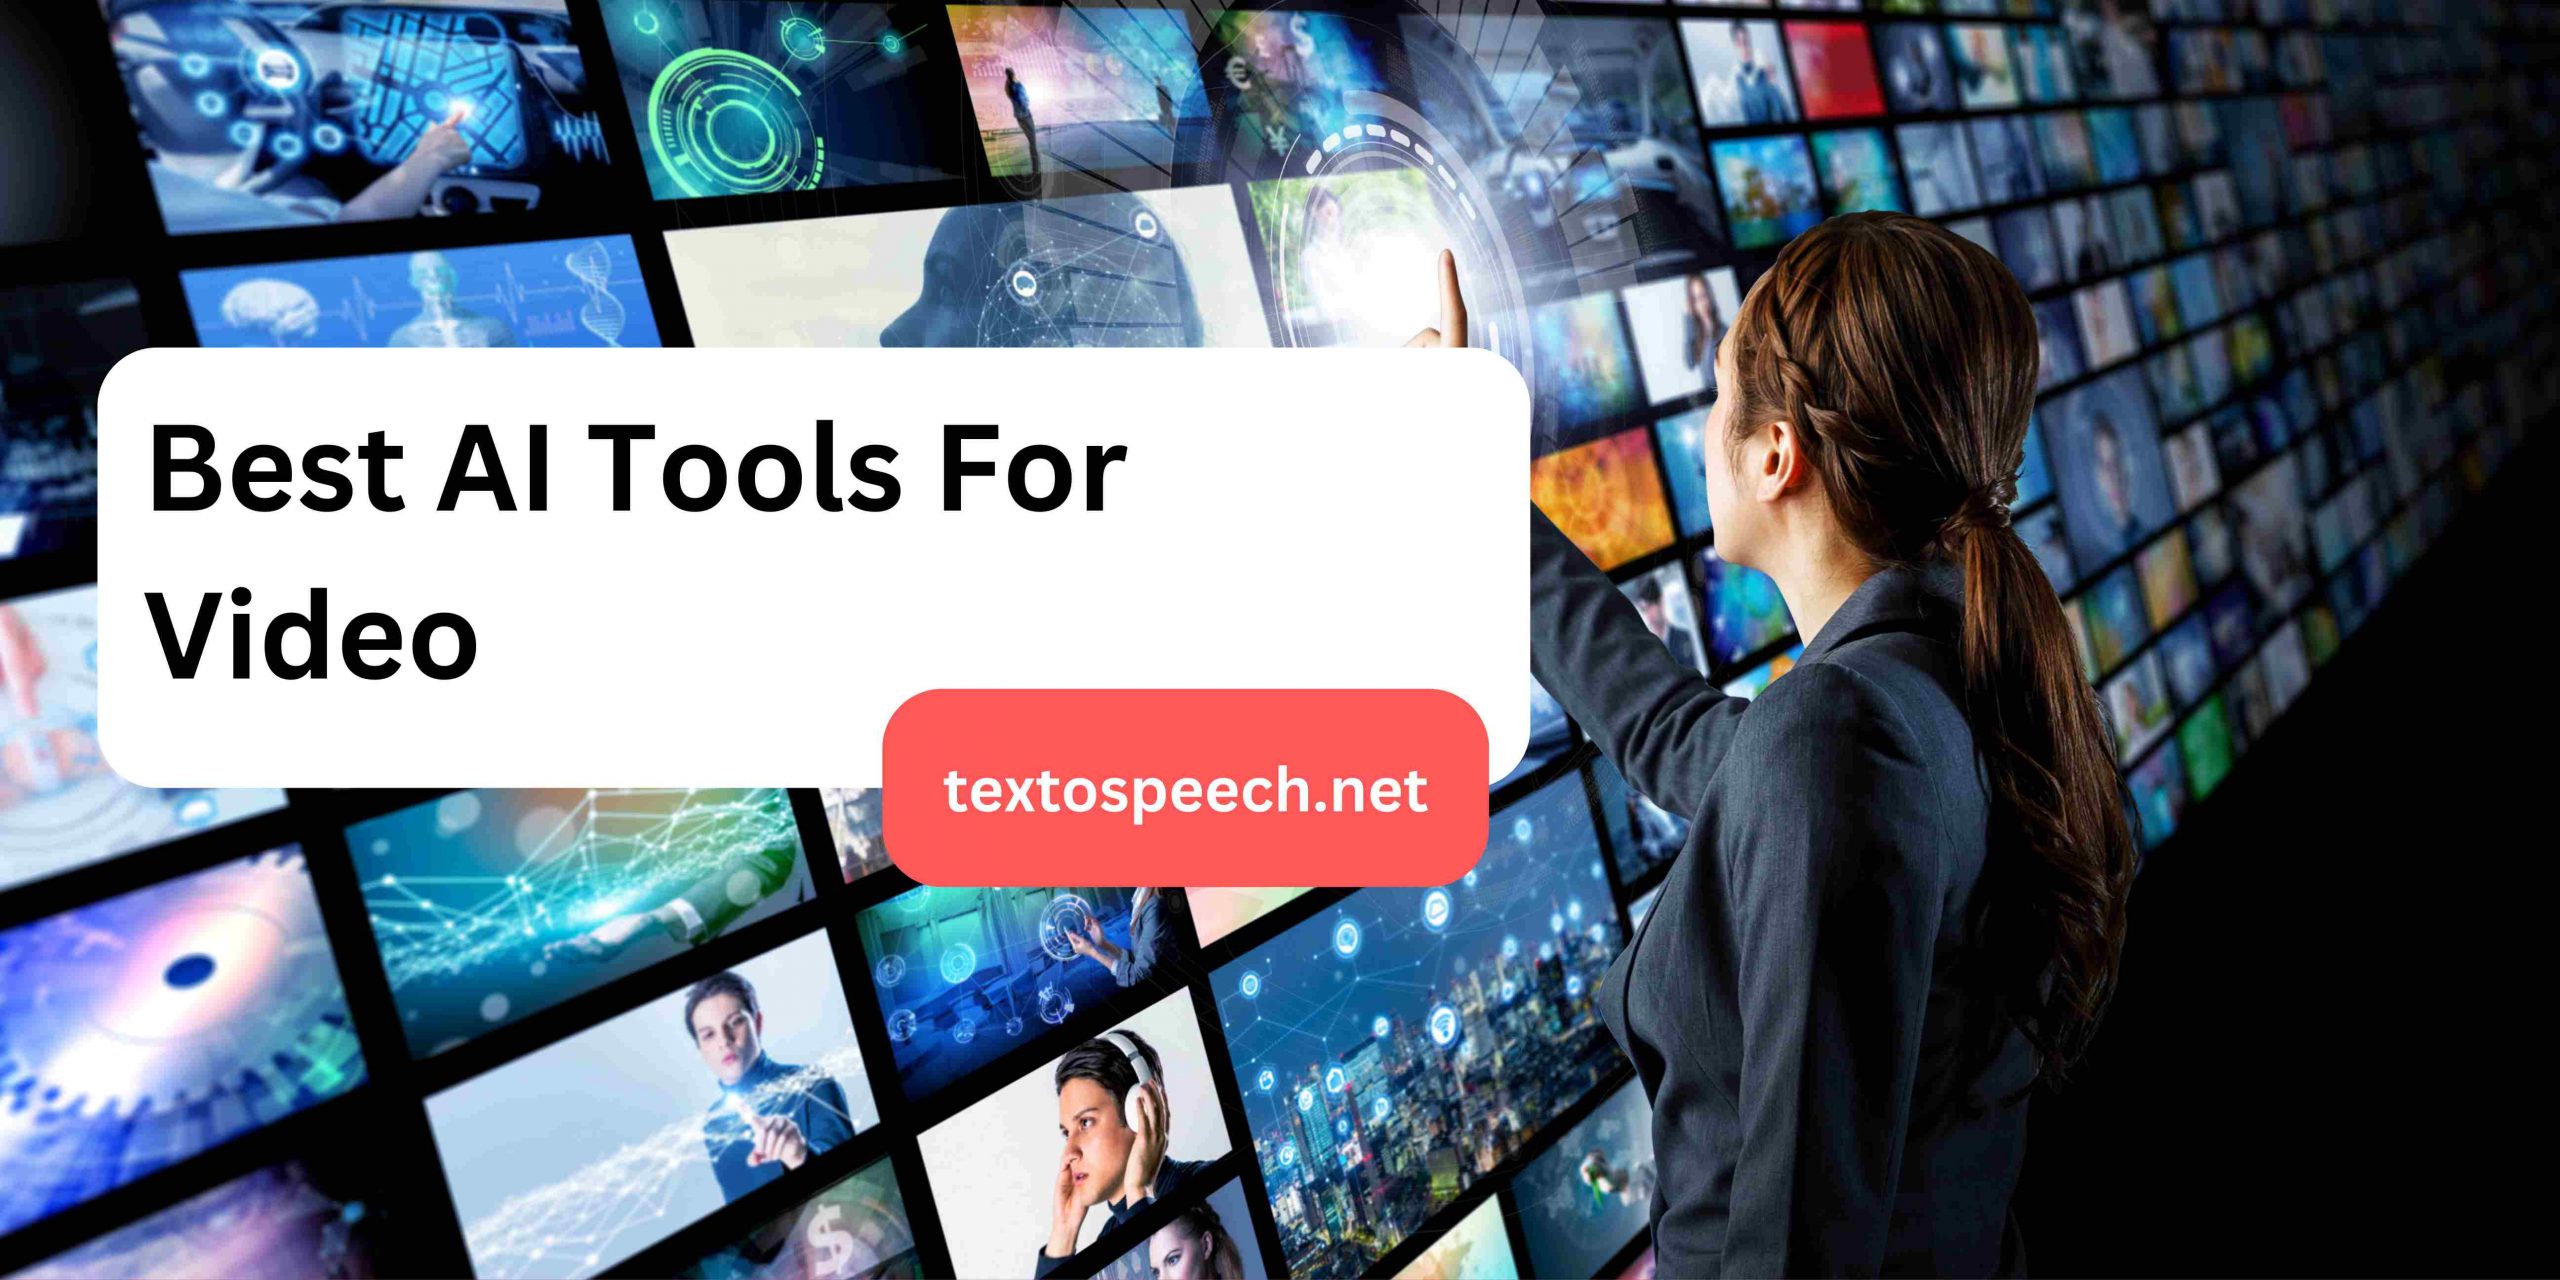 Best AI Tools For Video